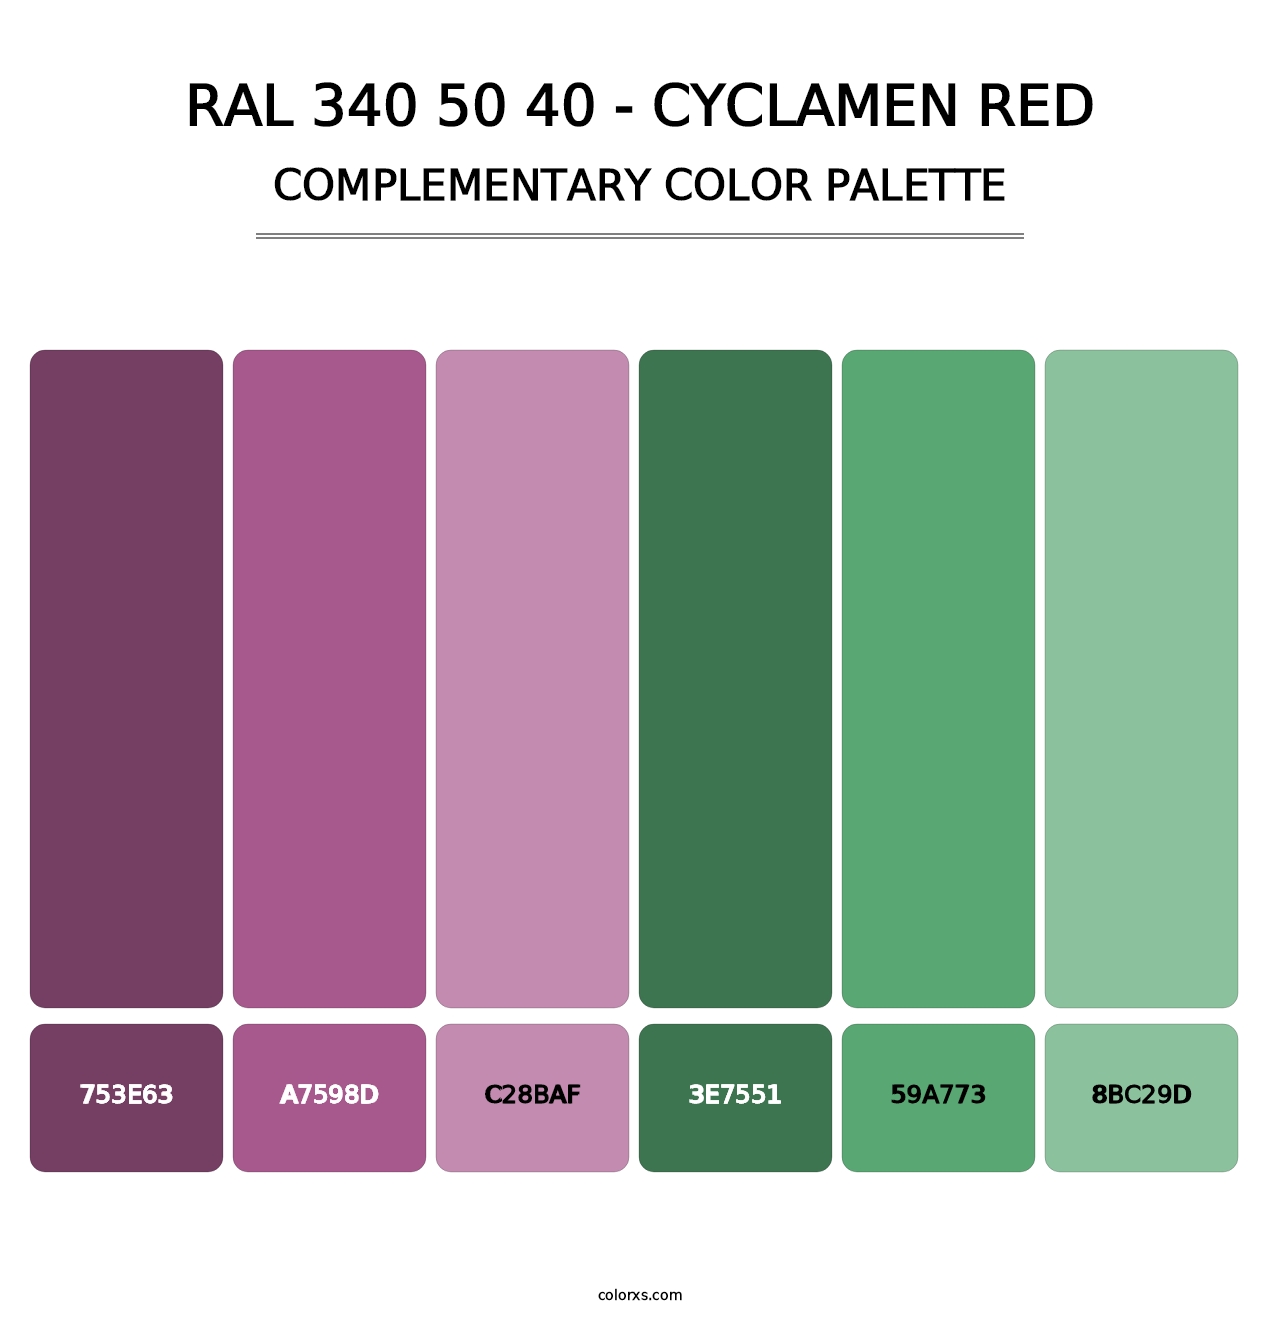 RAL 340 50 40 - Cyclamen Red - Complementary Color Palette